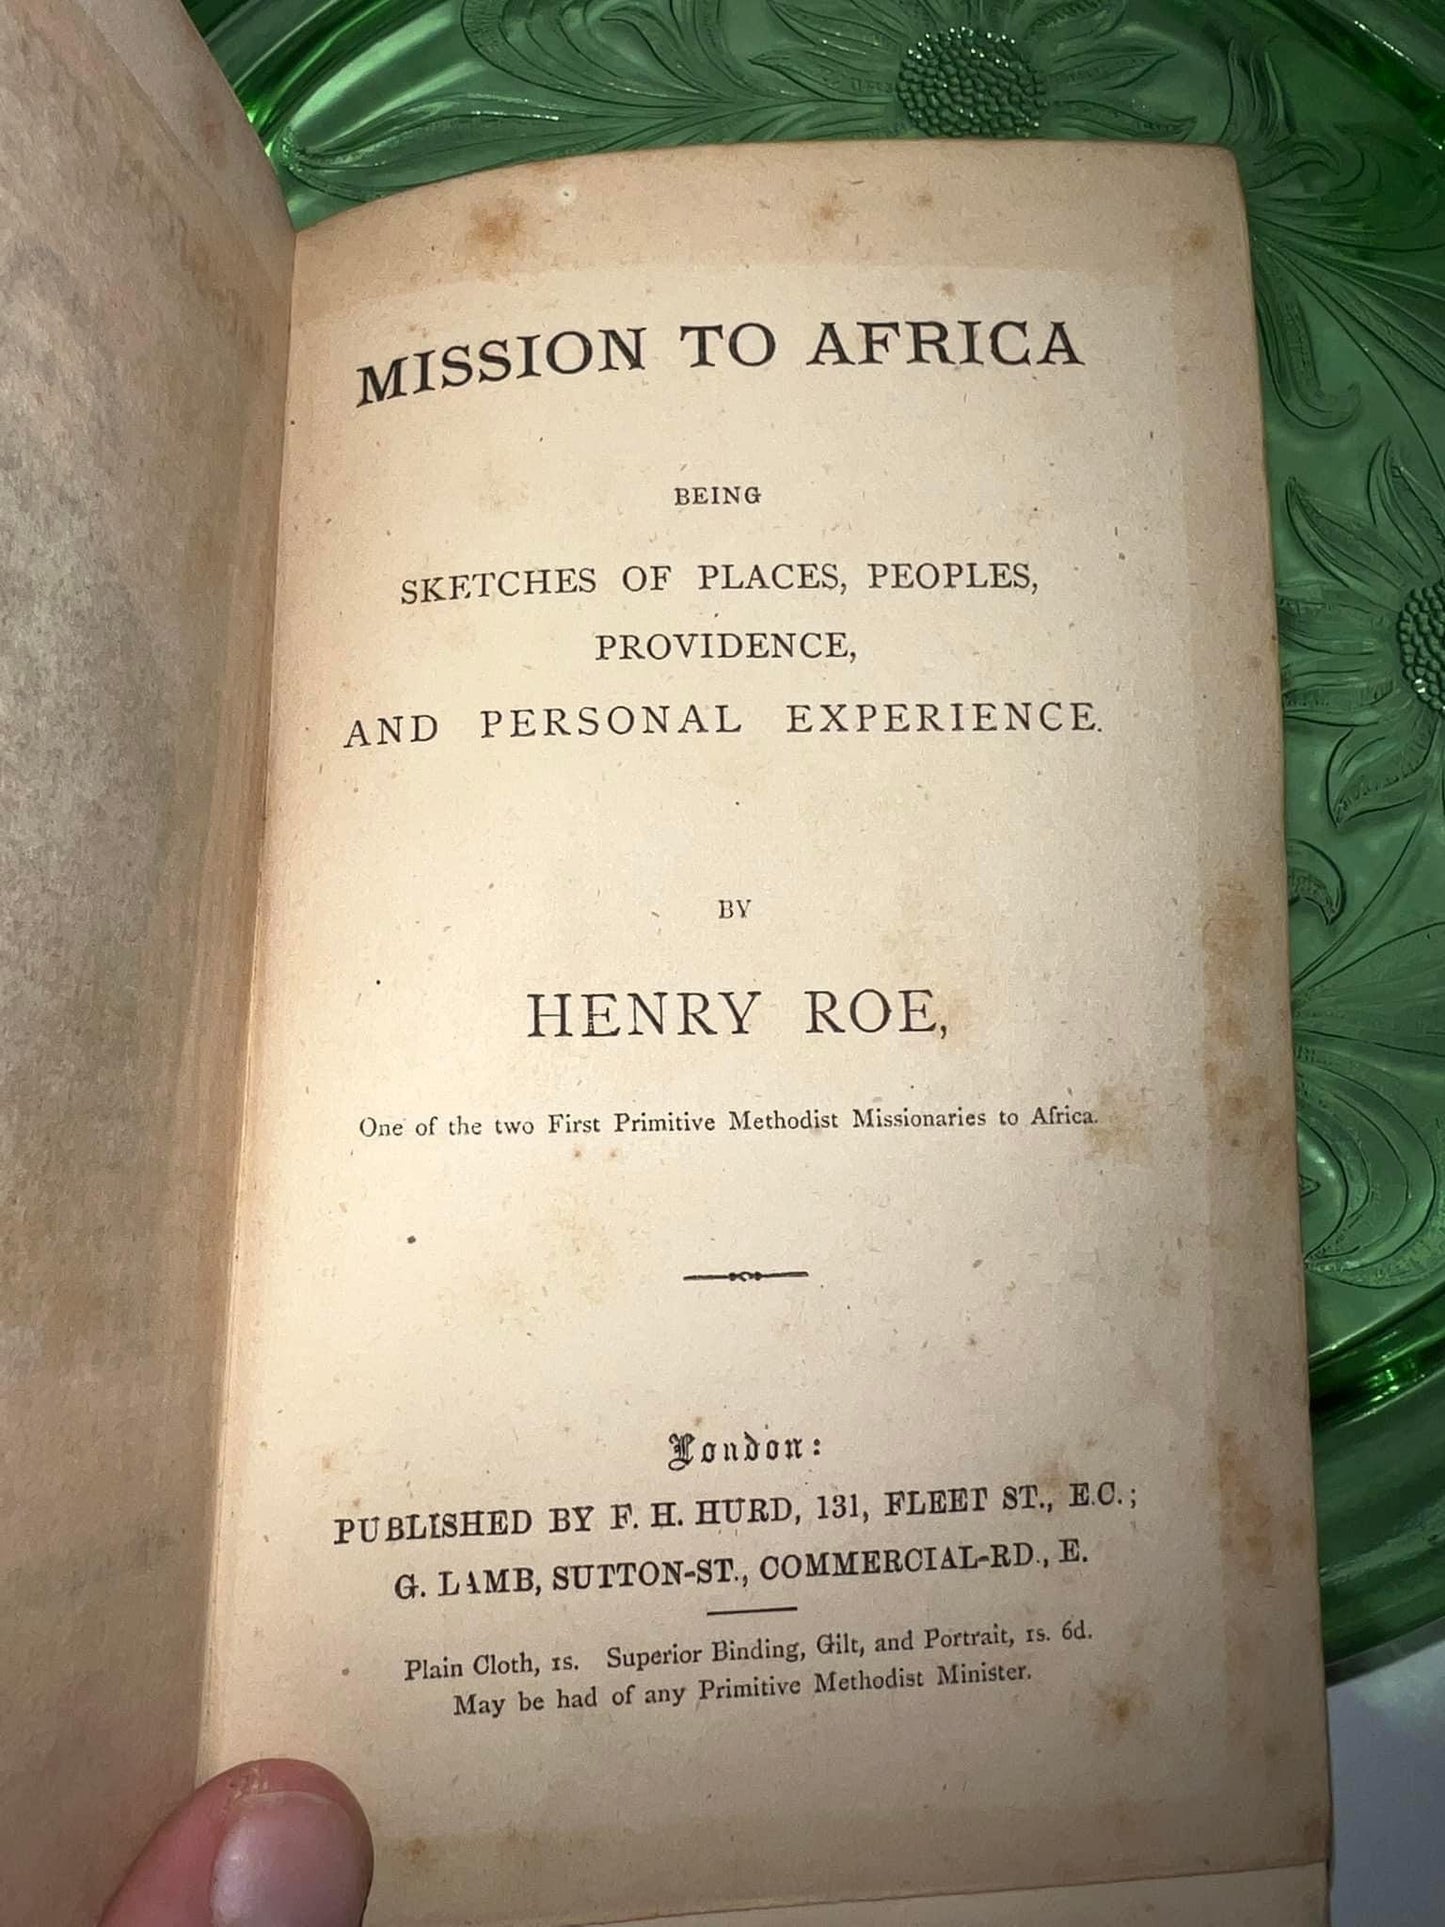 Antique history exploration Mission to Africa 1872 Henry roe scarce author signed ??